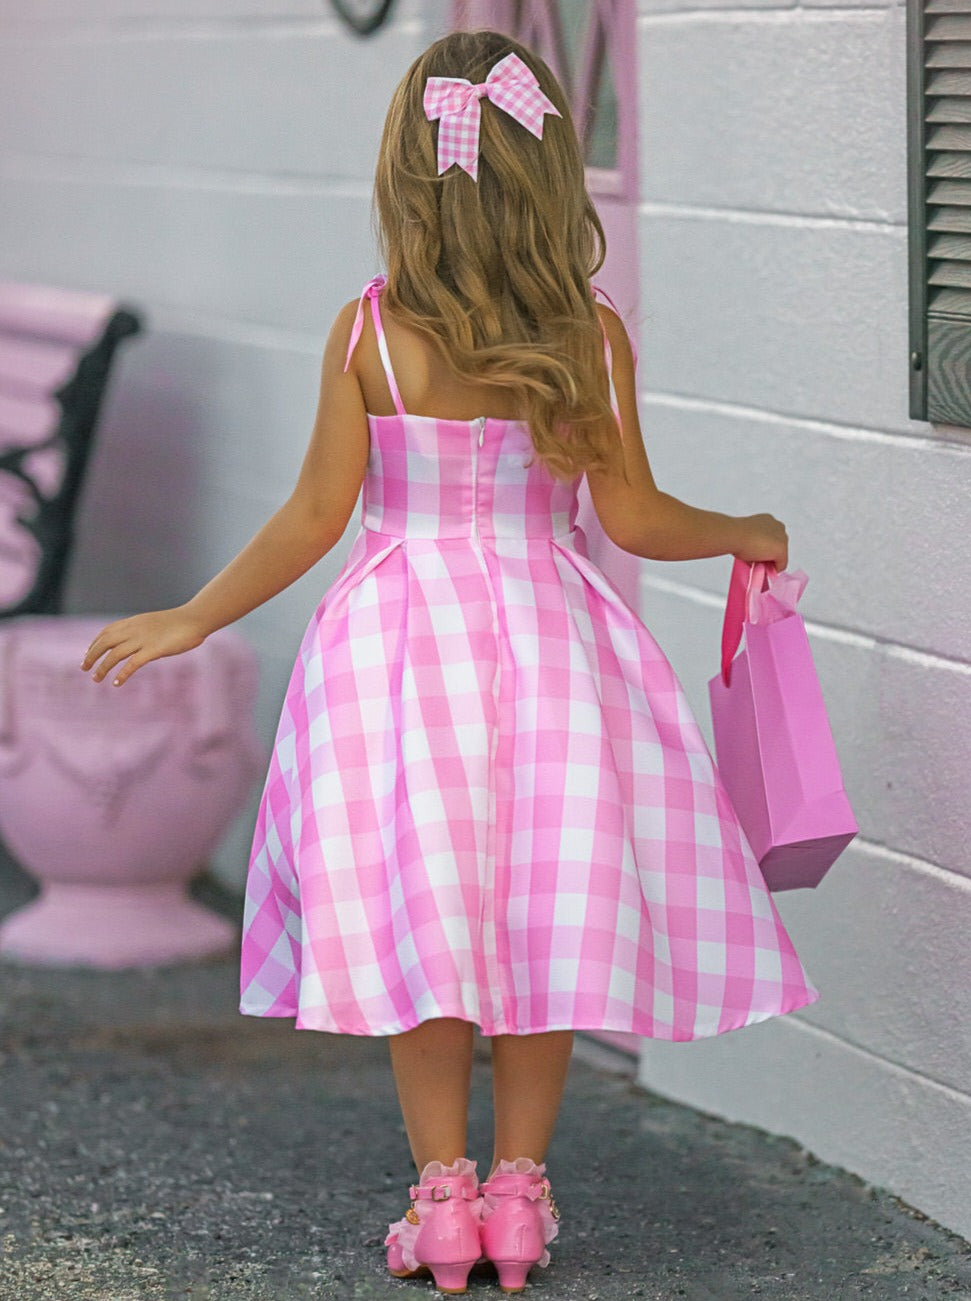 Mia Belle Mommy & Me Barbie Inspired Pink Gingham Dress Costumes